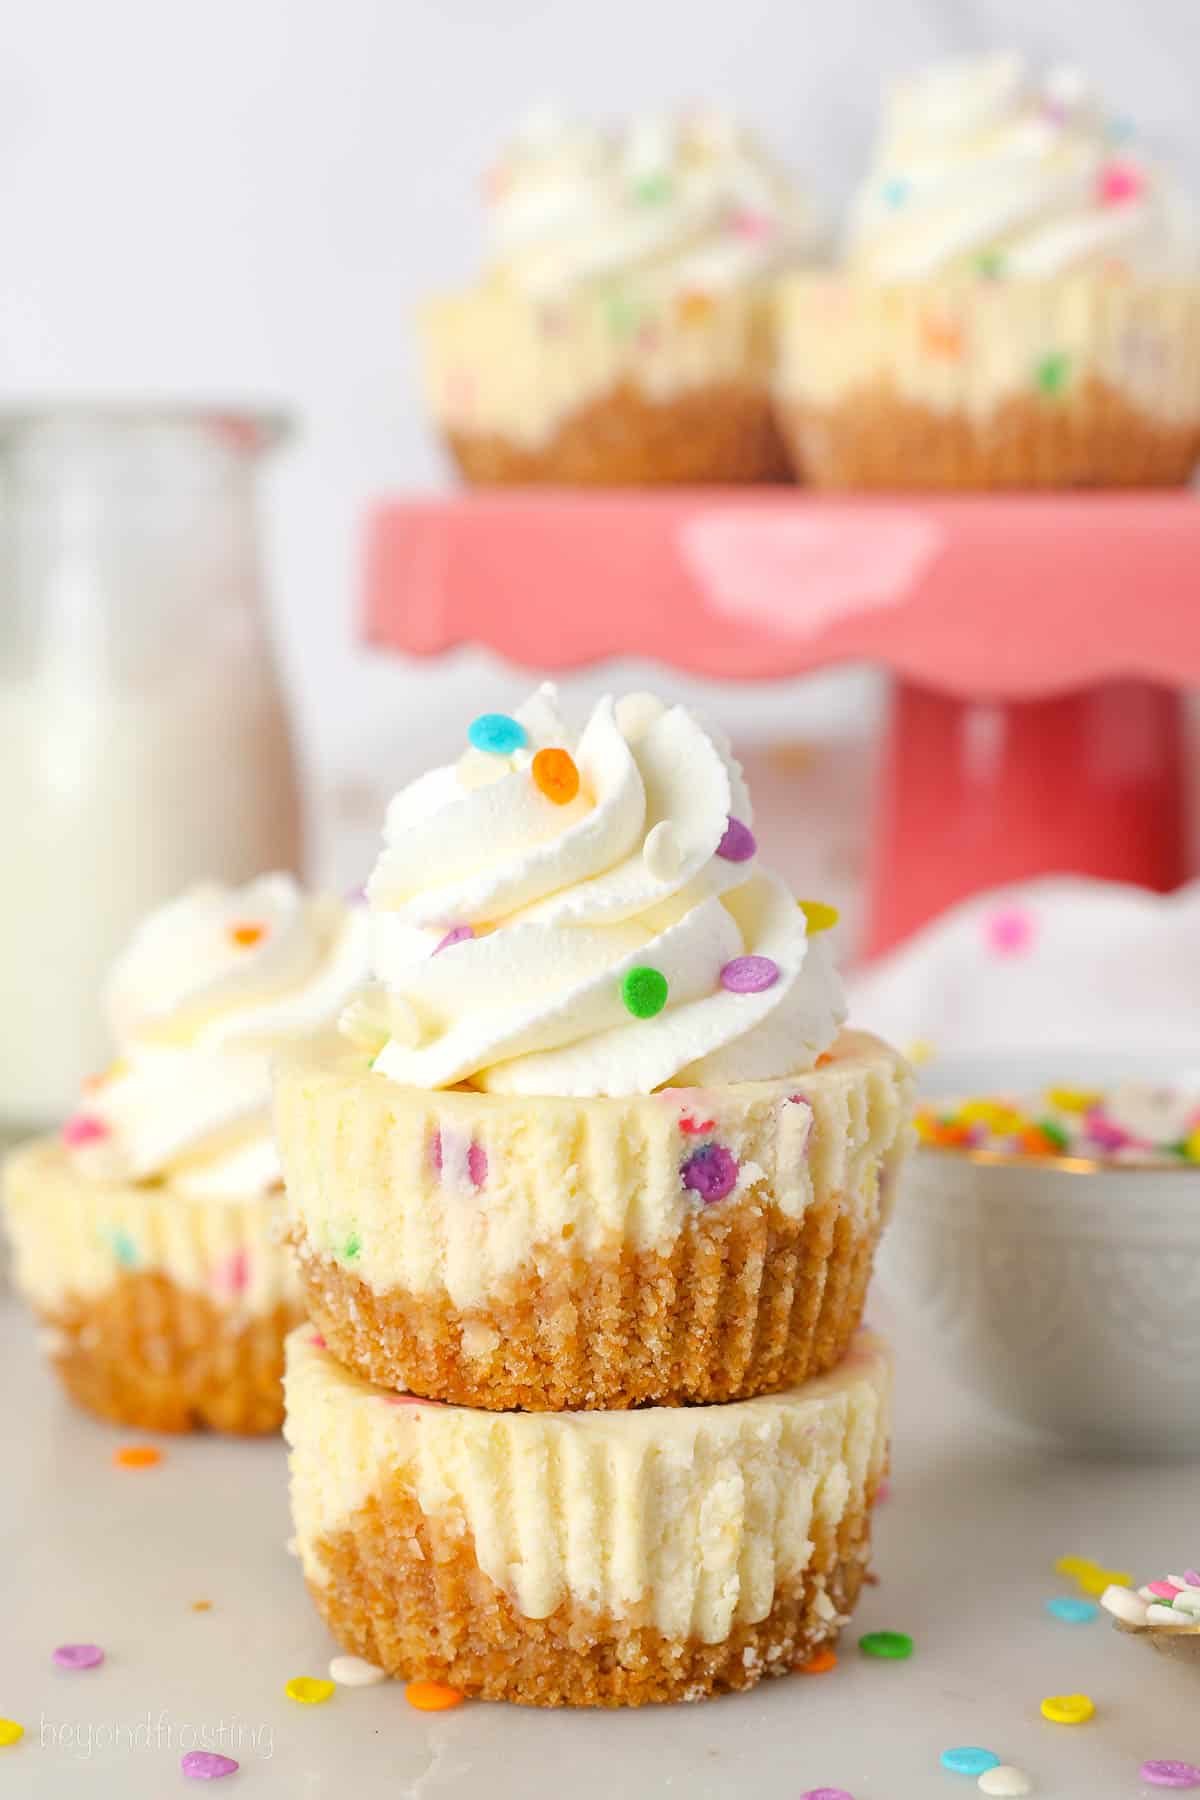 Two mini funfetti cheesecakes stacked on top of one another with a swirl of whipped cream and sprinkles, plus more cheesecakes on a cake stand in the background.